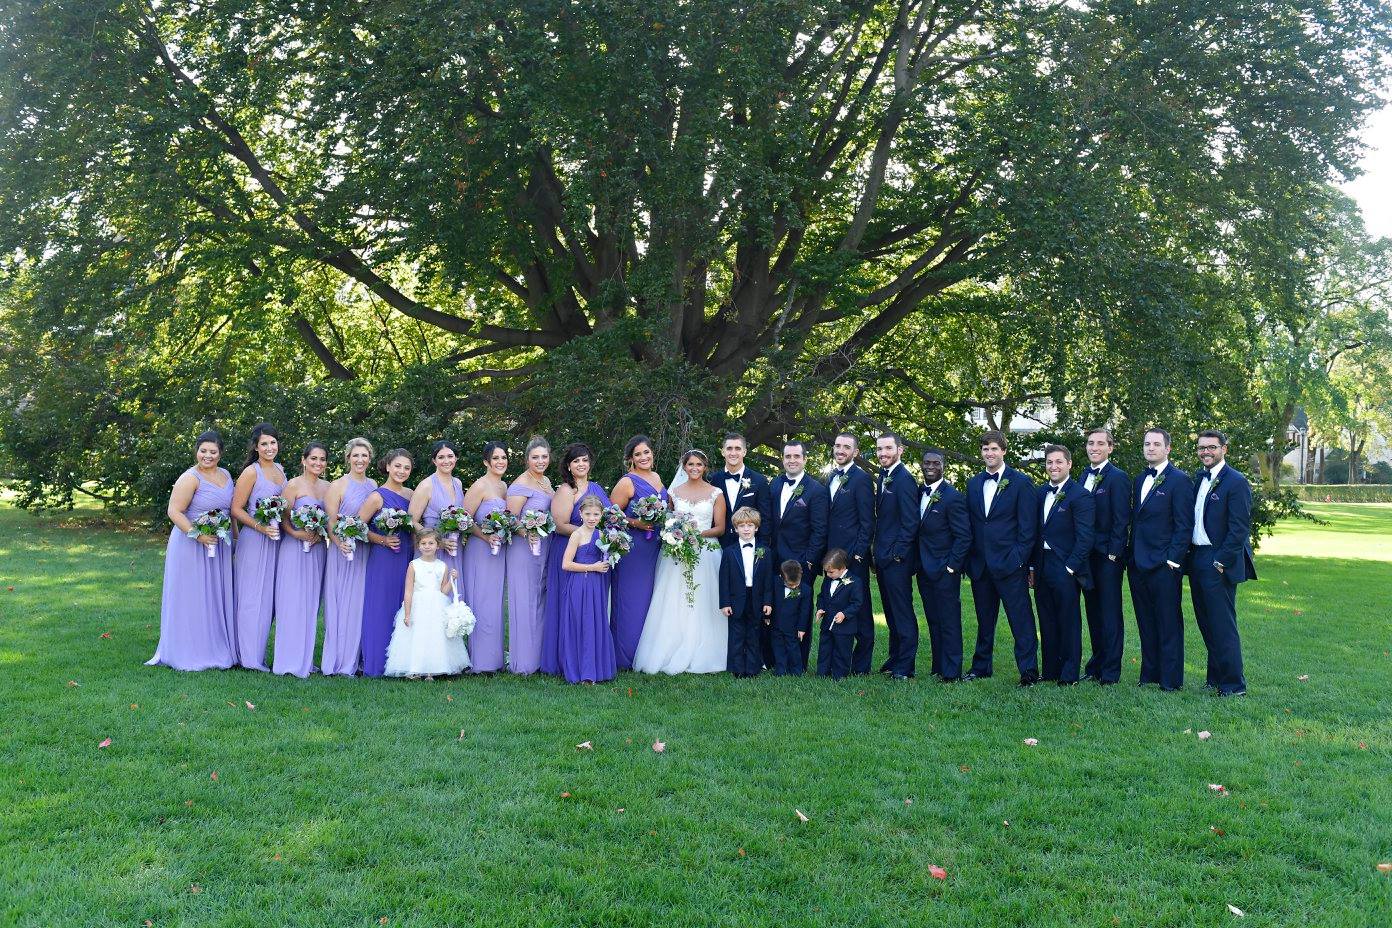 bridesmaids in mismatched purple gowns and groomsmen in black tuxedos